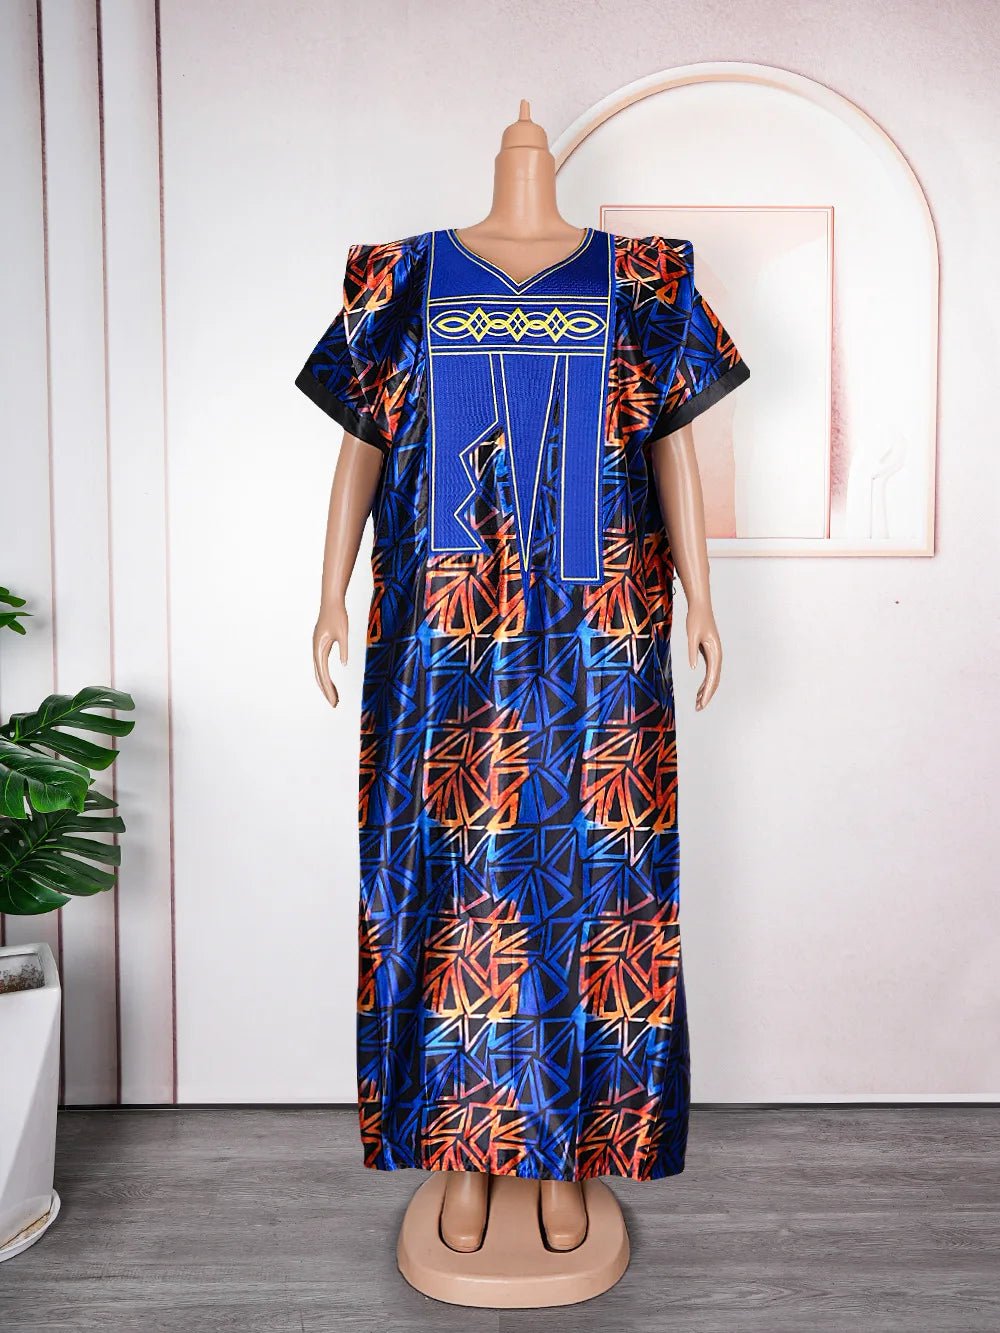 Elegant African Fashion: Women's Abayas, Boubou, and Dashiki Outfits for Evening Wear - Flexi Africa - Free Delivery Worldwide only at www.flexiafrica.com